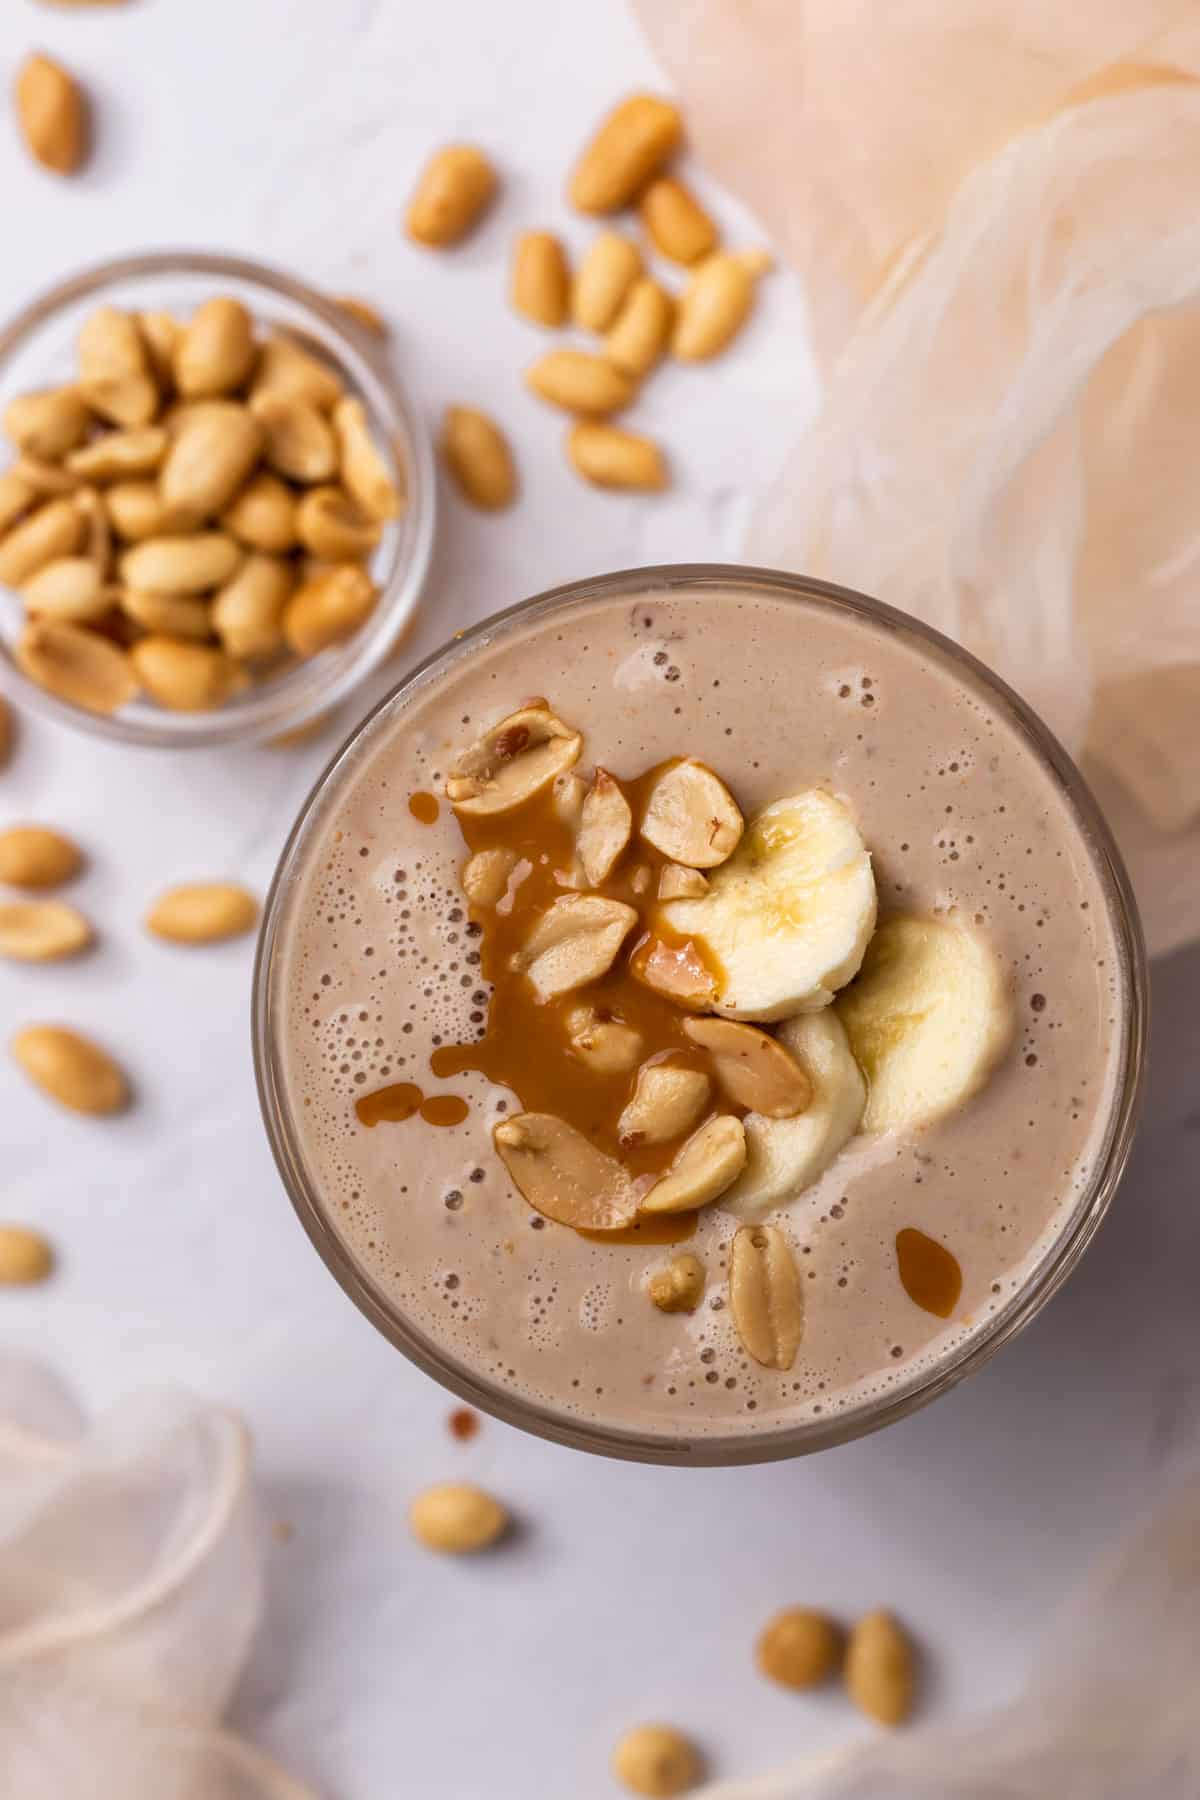 Peanut butter smoothie decorated with banana slices, peanut butter and peanuts